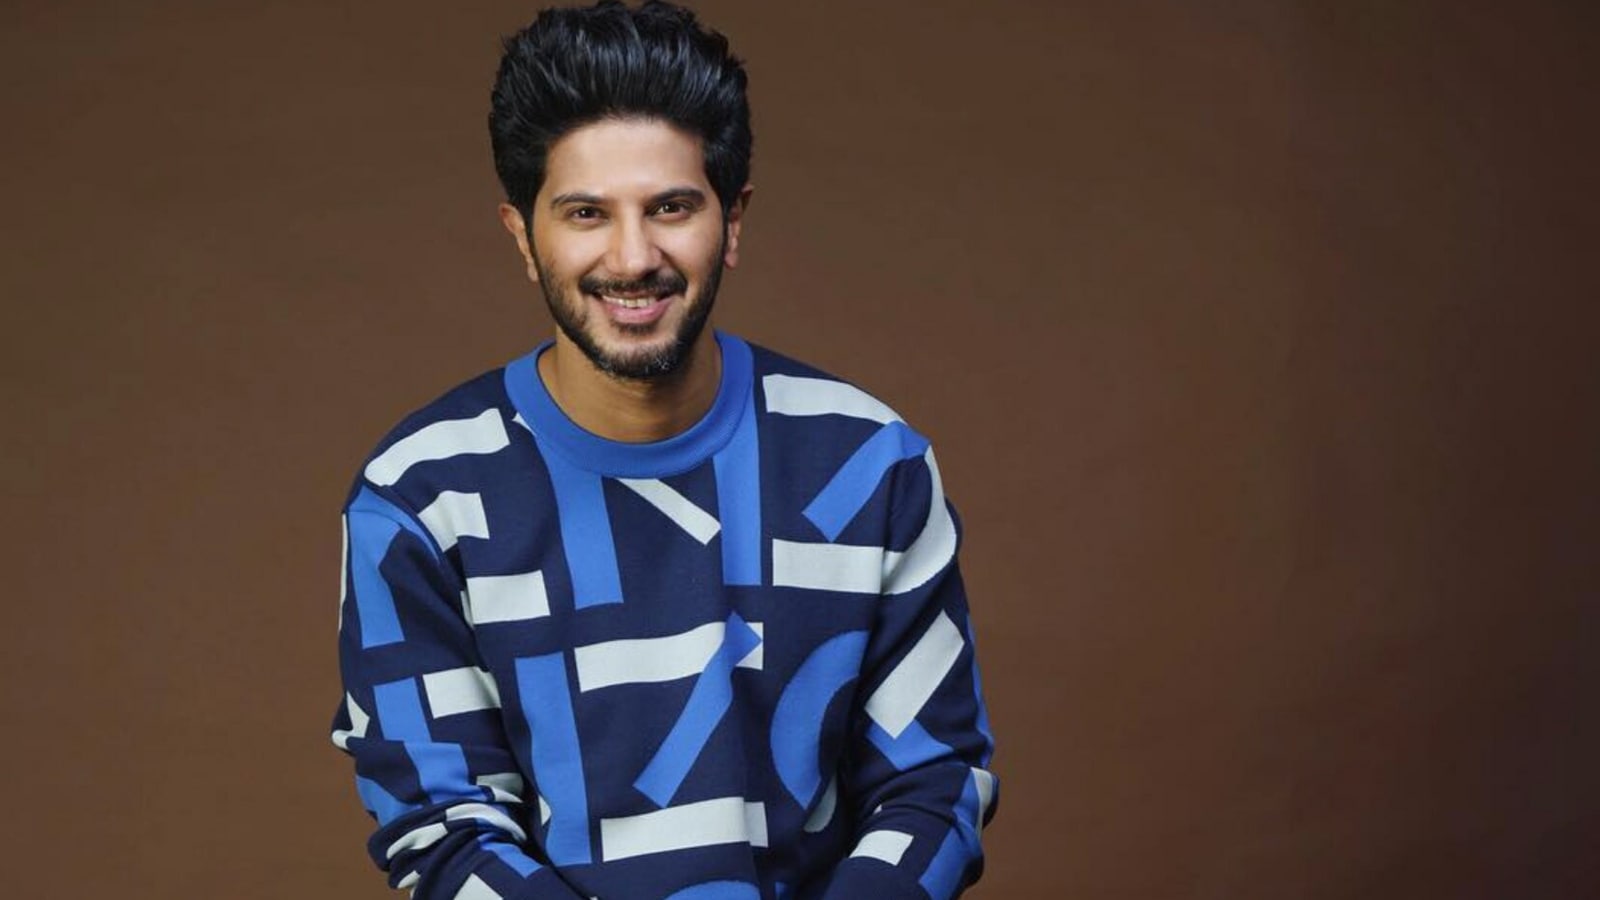 Actor Dulquer Salmaan tests positive for Covid-19, says he has mild symptoms - Hindustan Times